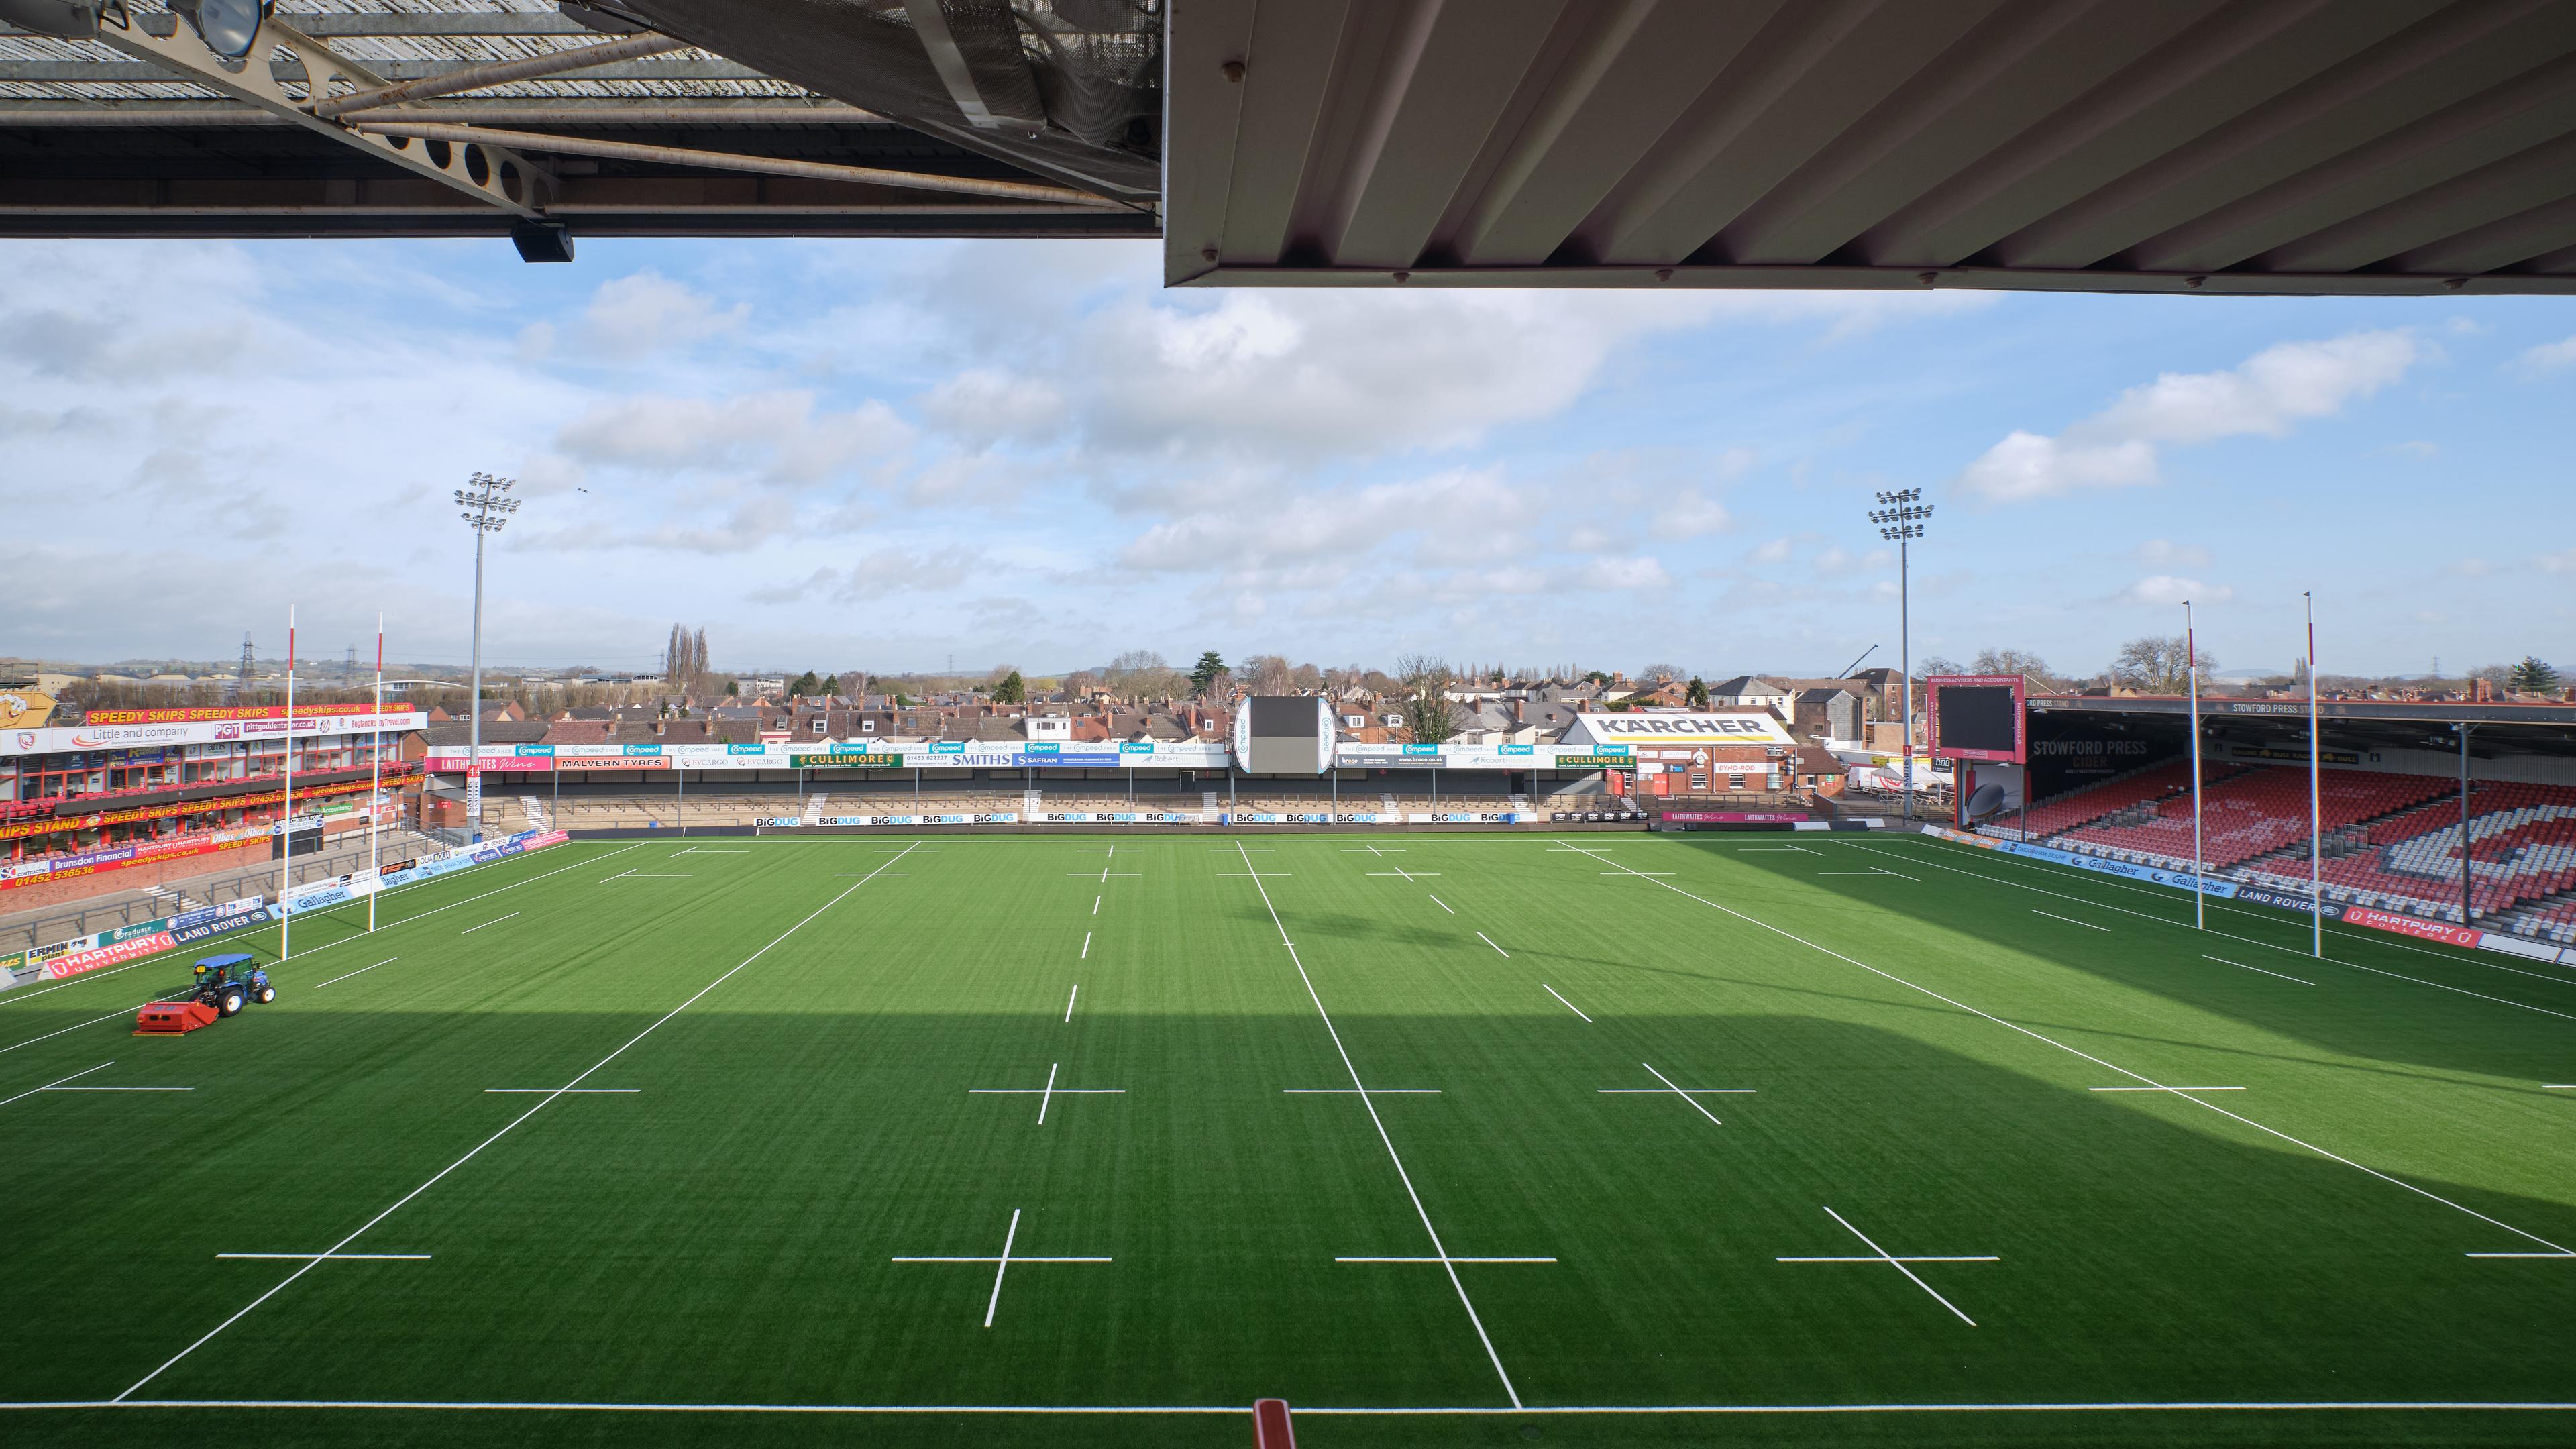 Captains Lounge, Gloucester Rugby Club: Kingsholm Stadium photo #18